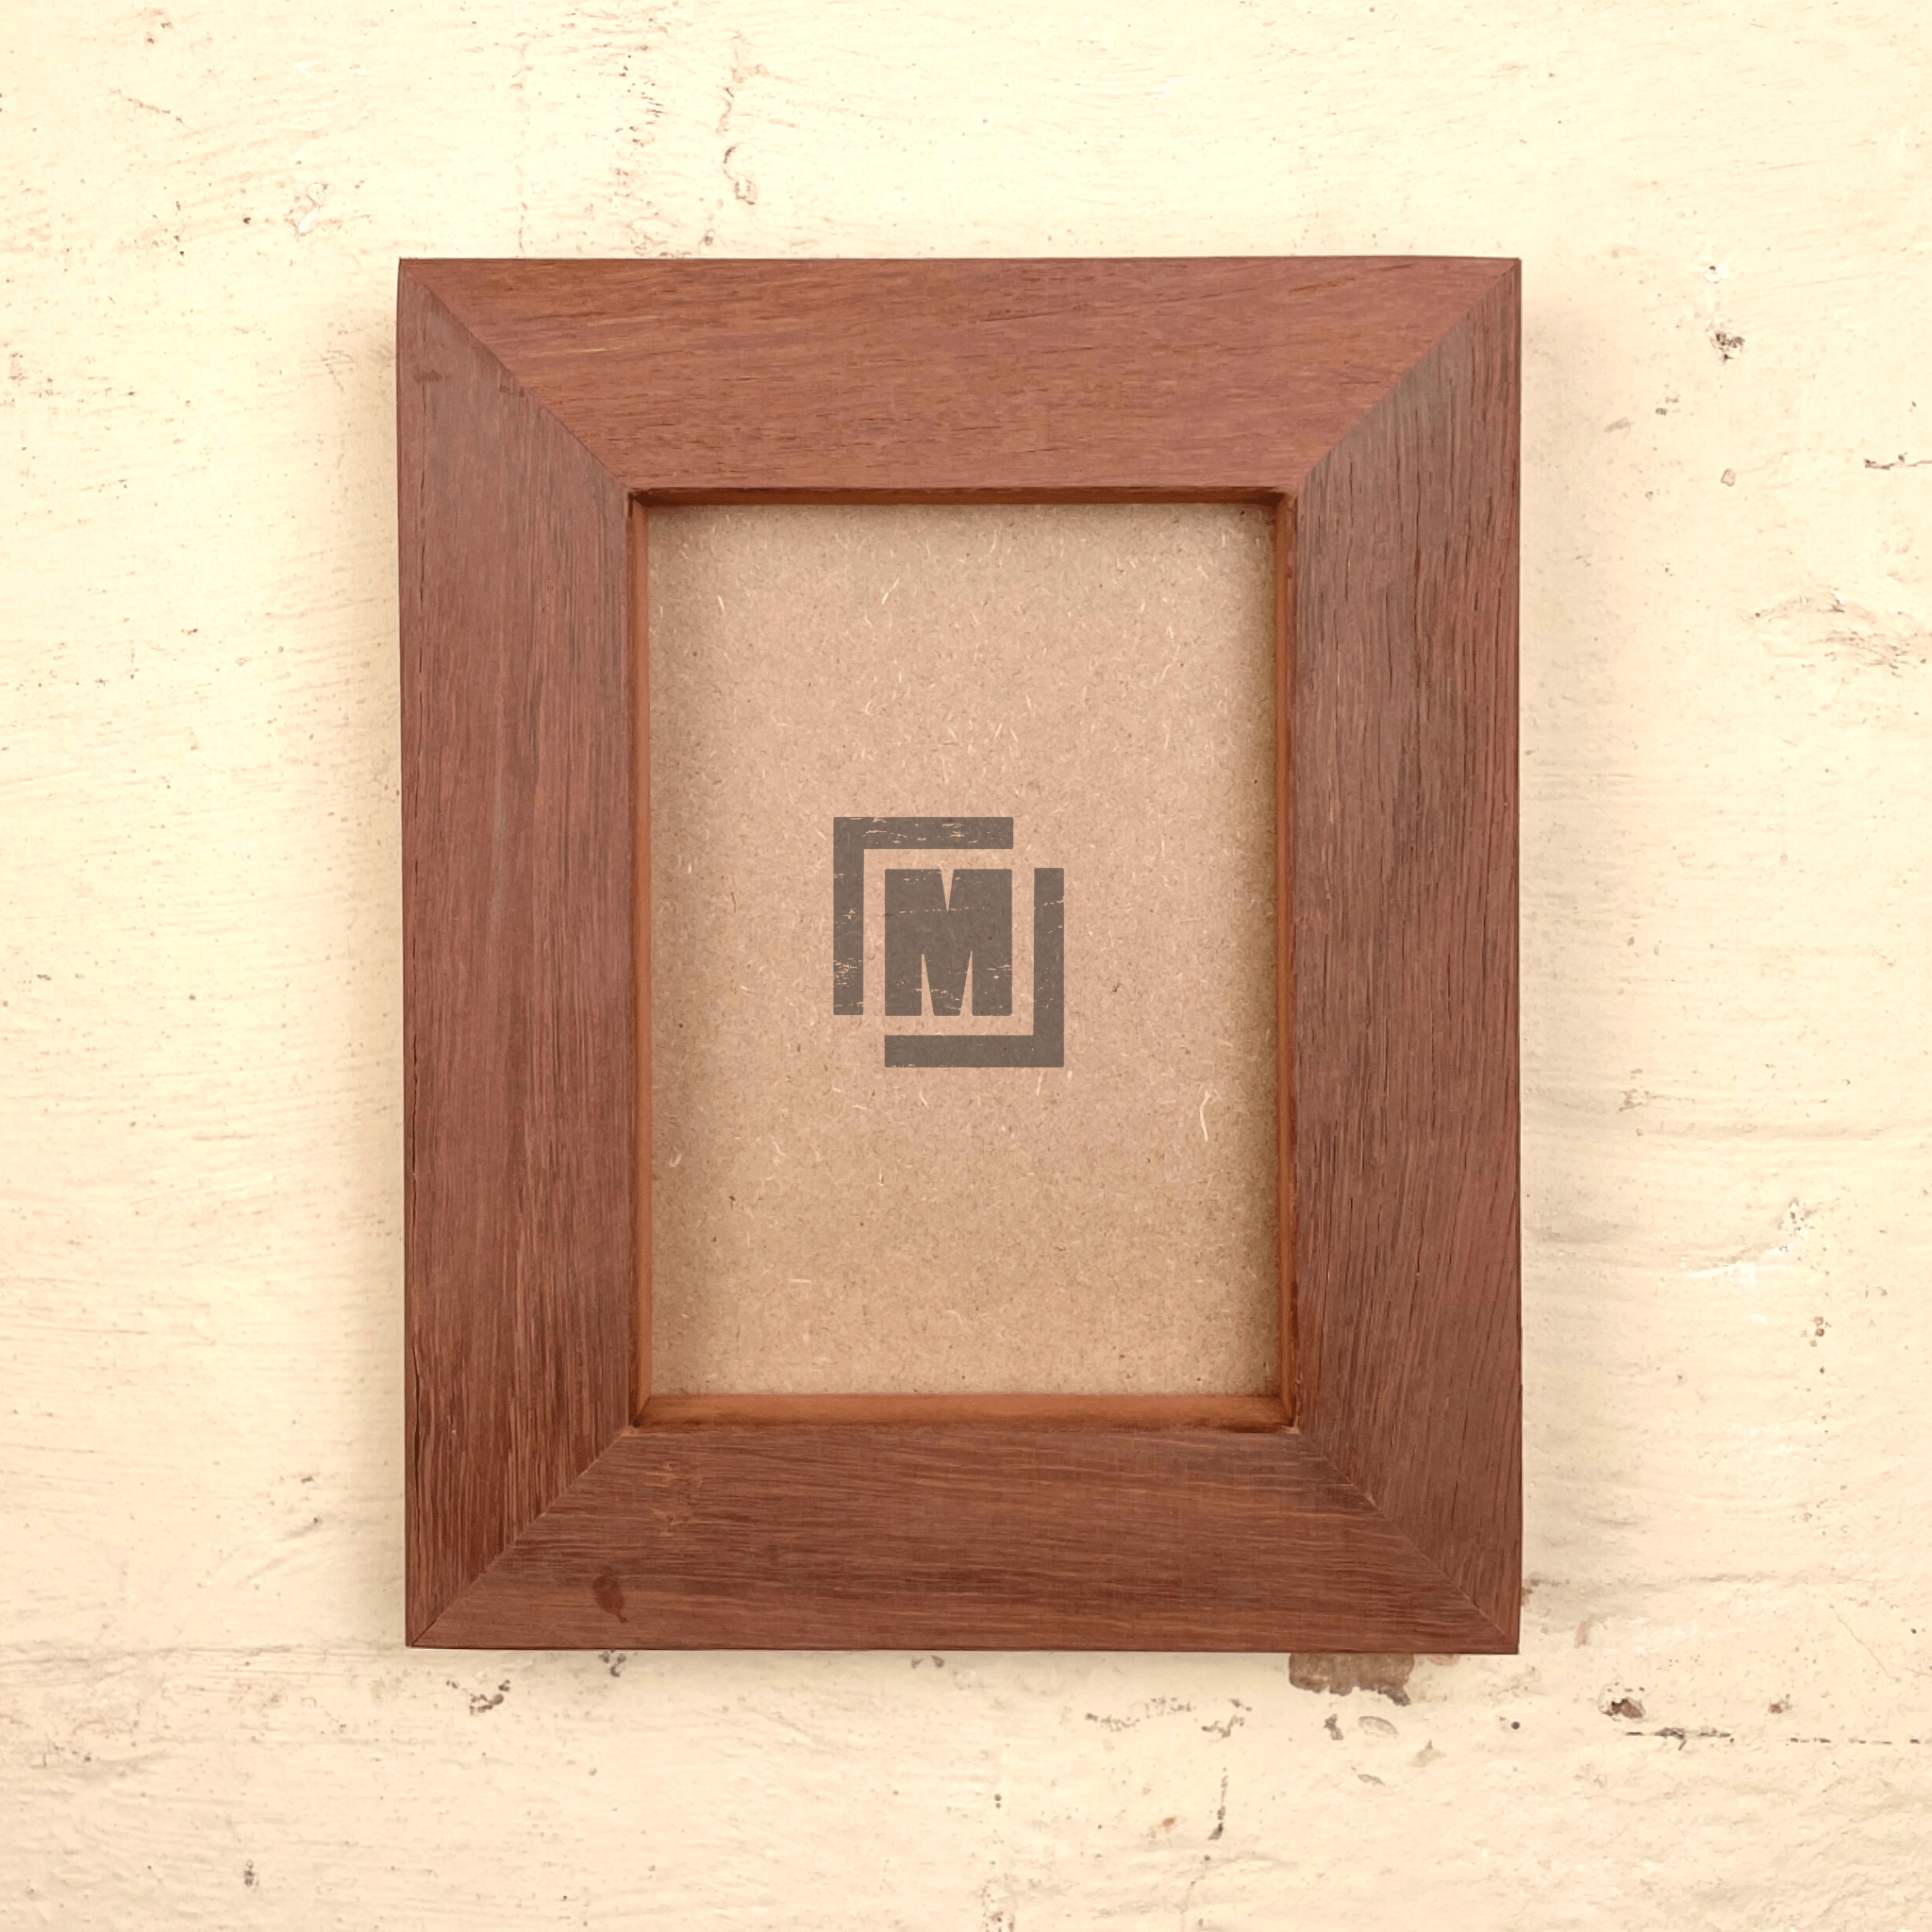 7" x 5" River red gum photo frame by Mulbury